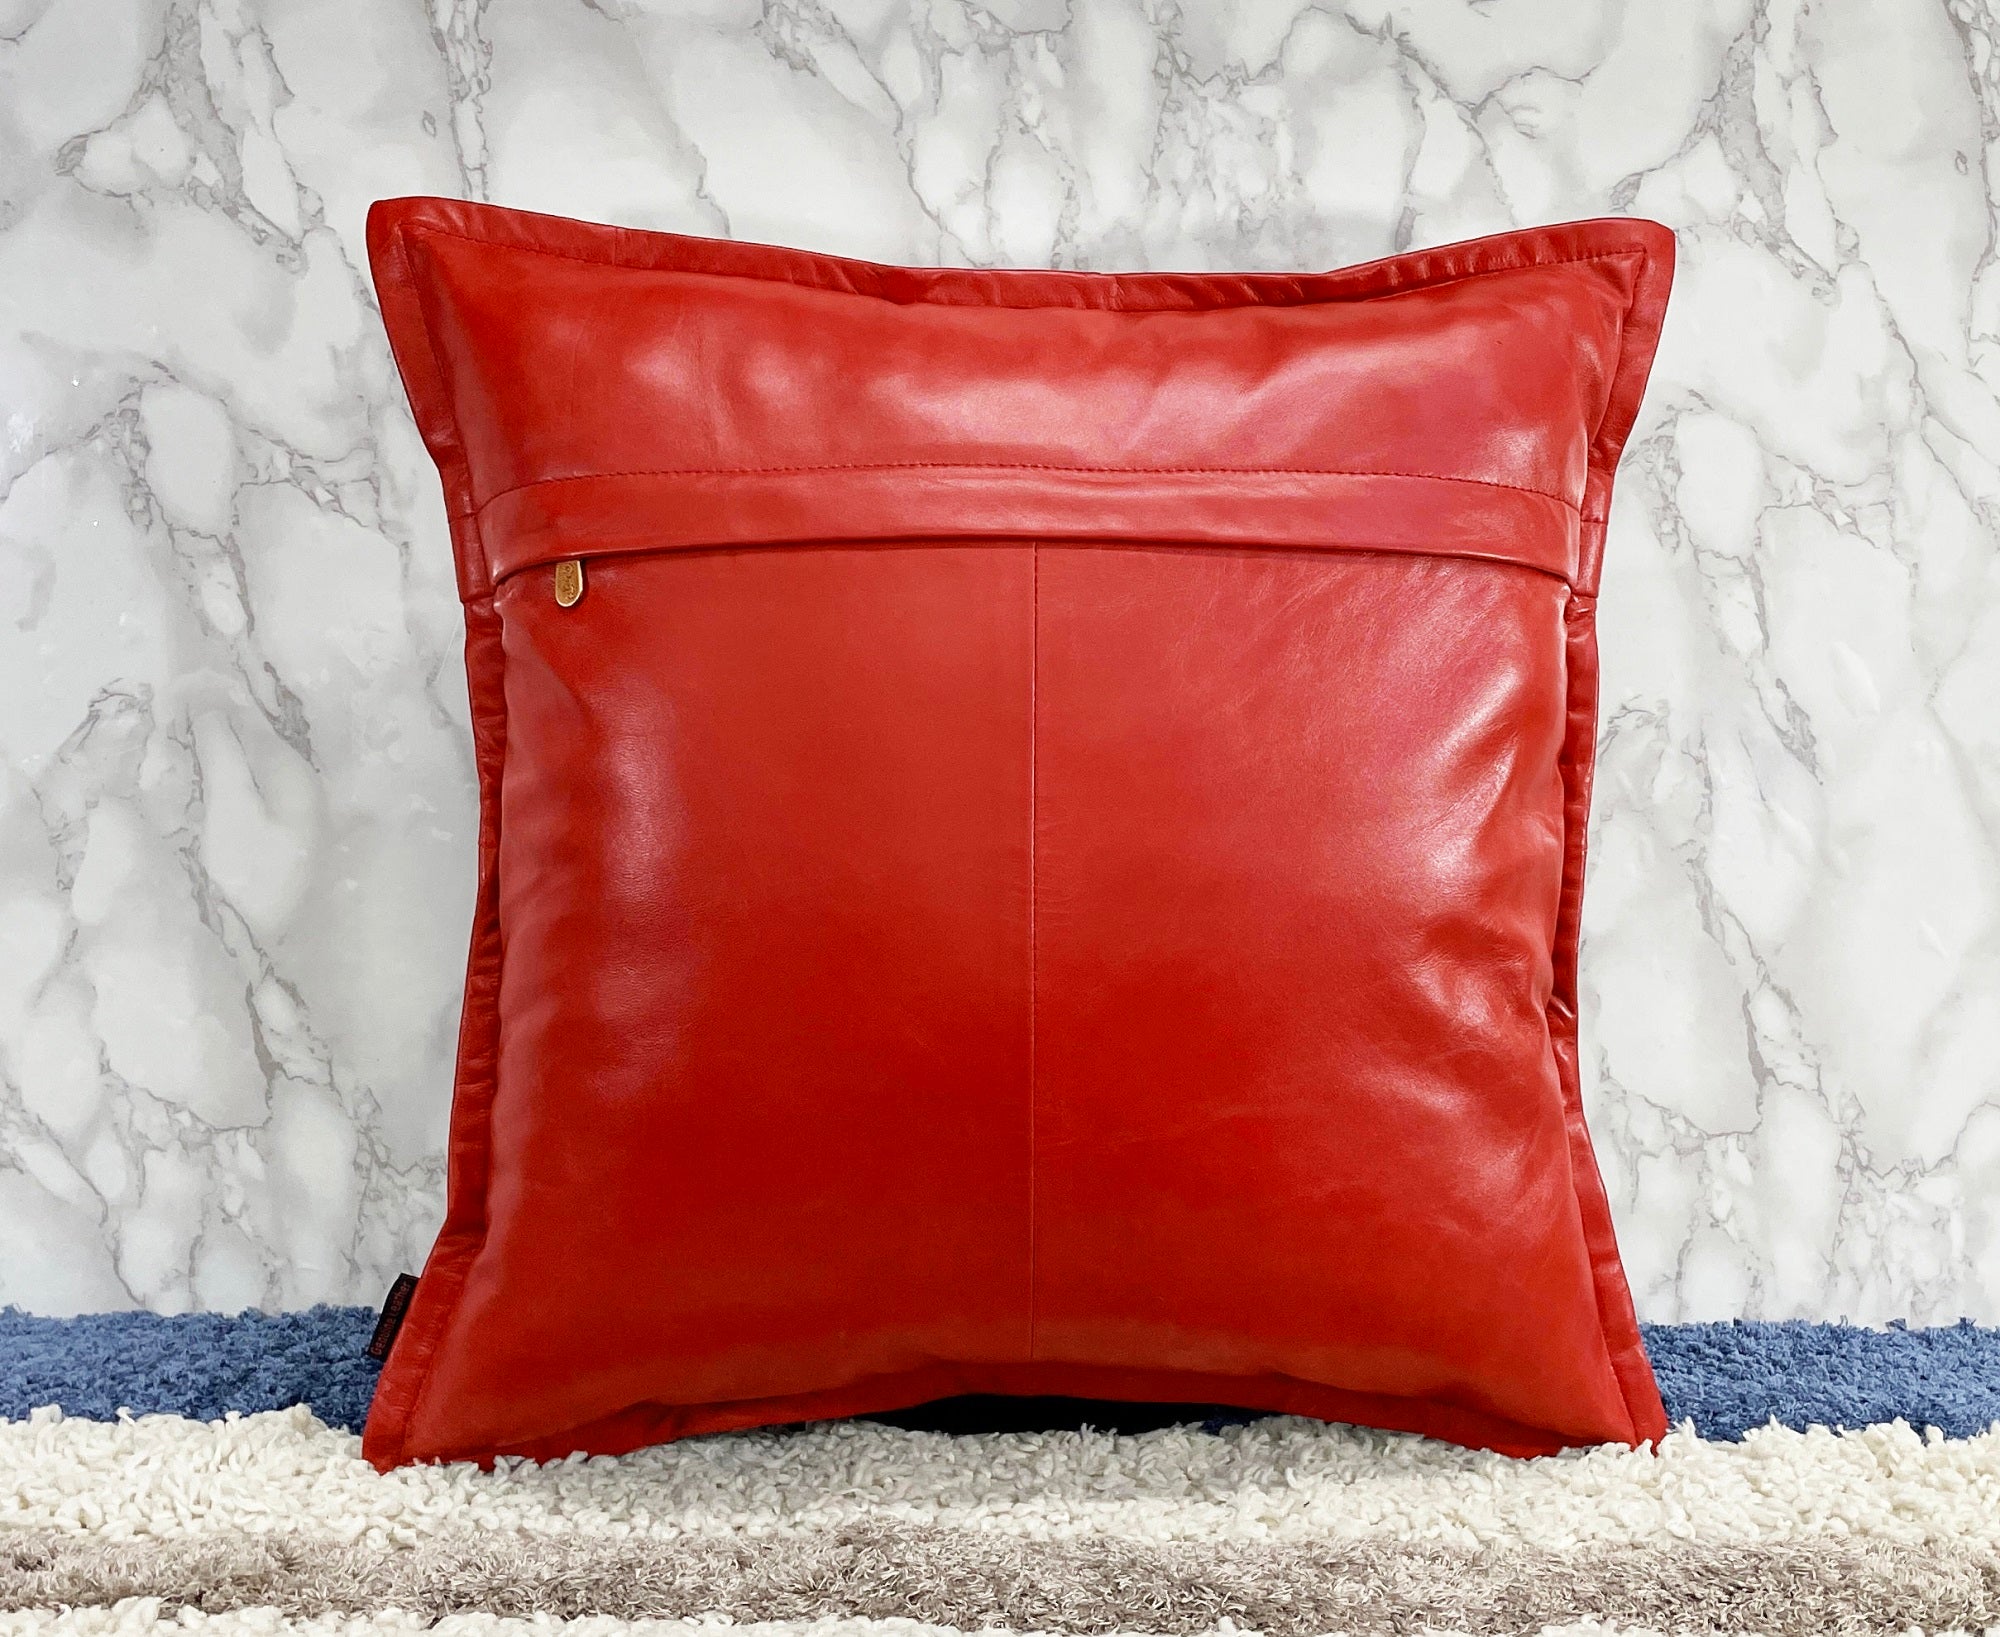 Genuine Leather Square Pillow Cover 24 SkinOutfit